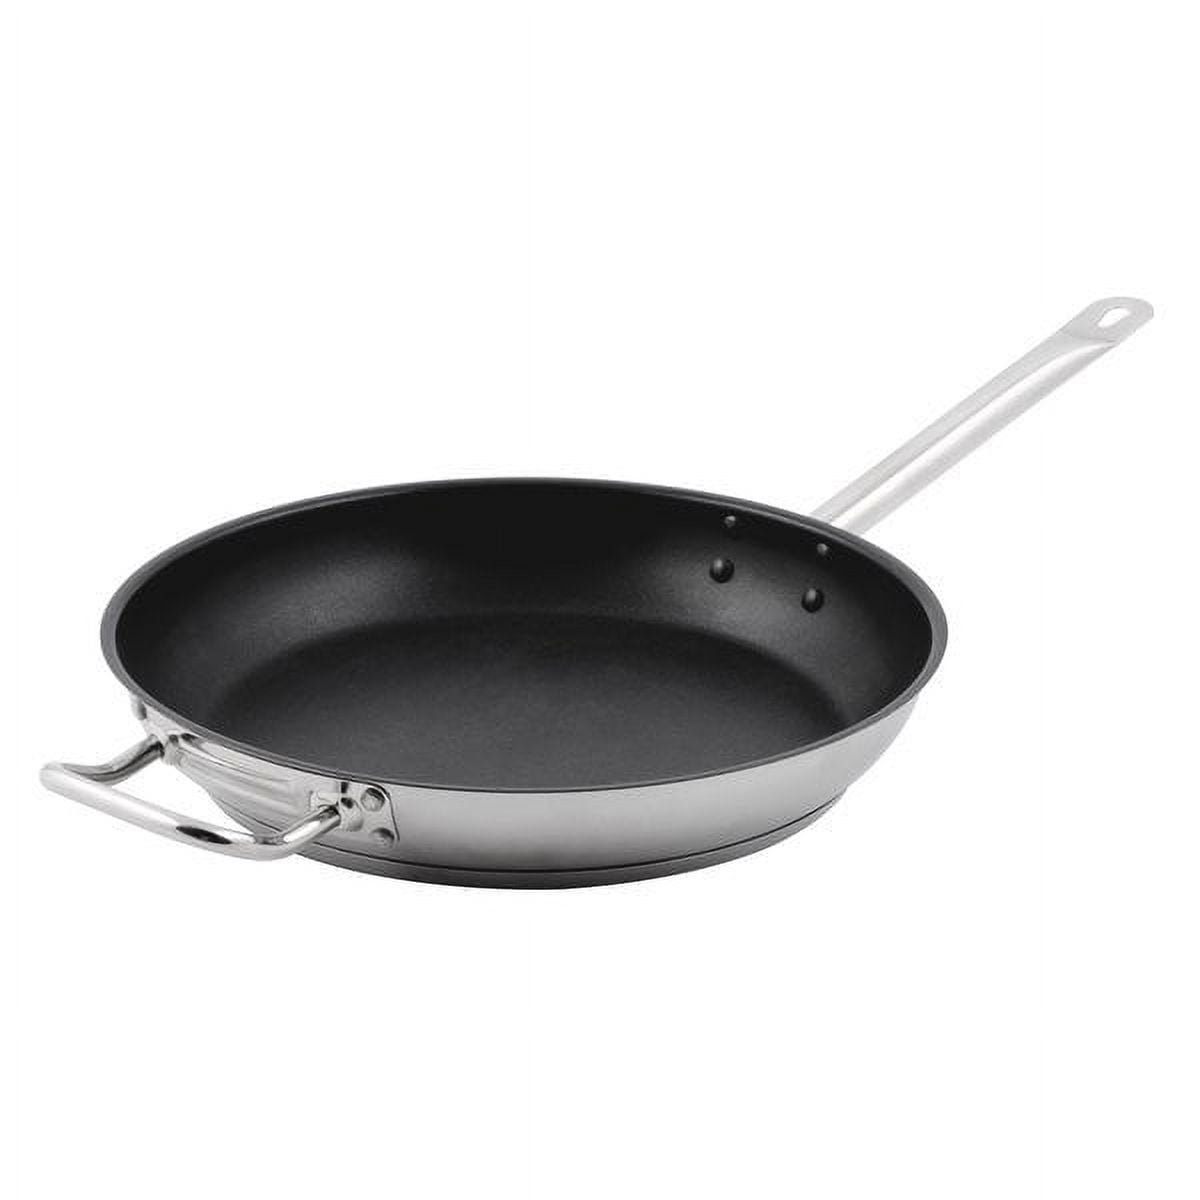 Vigor 14 Stainless Steel Fry Pan with Aluminum-Clad Bottom and Helper Handle